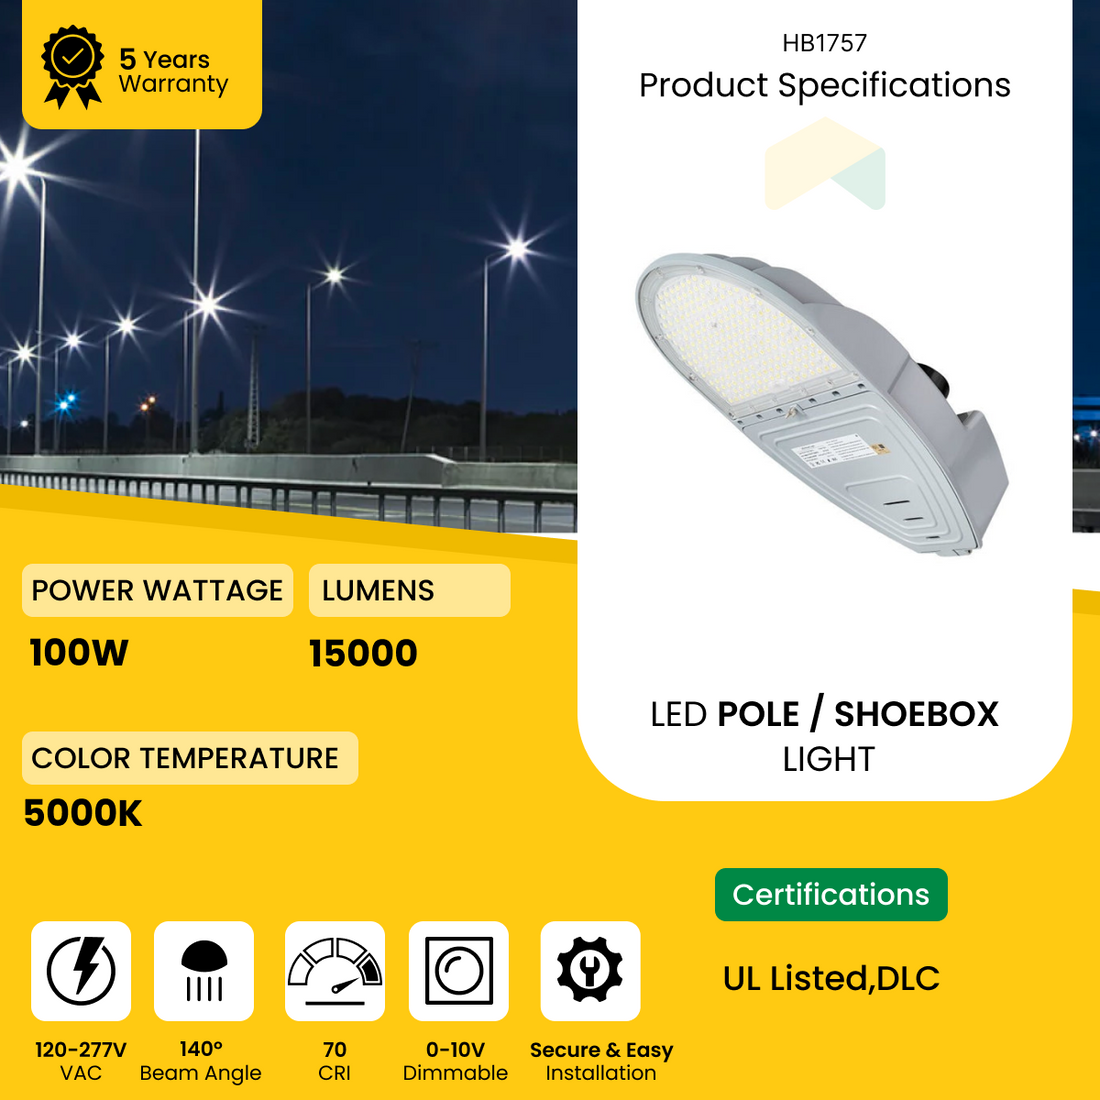 LED Street Light - 100W -Direct Mount, 15000 Lumens - 5000K - AC 120-277V - 0-10V Dimmable, IP66 - UL Listed - DLC Premium Listed - 5 Years Warranty